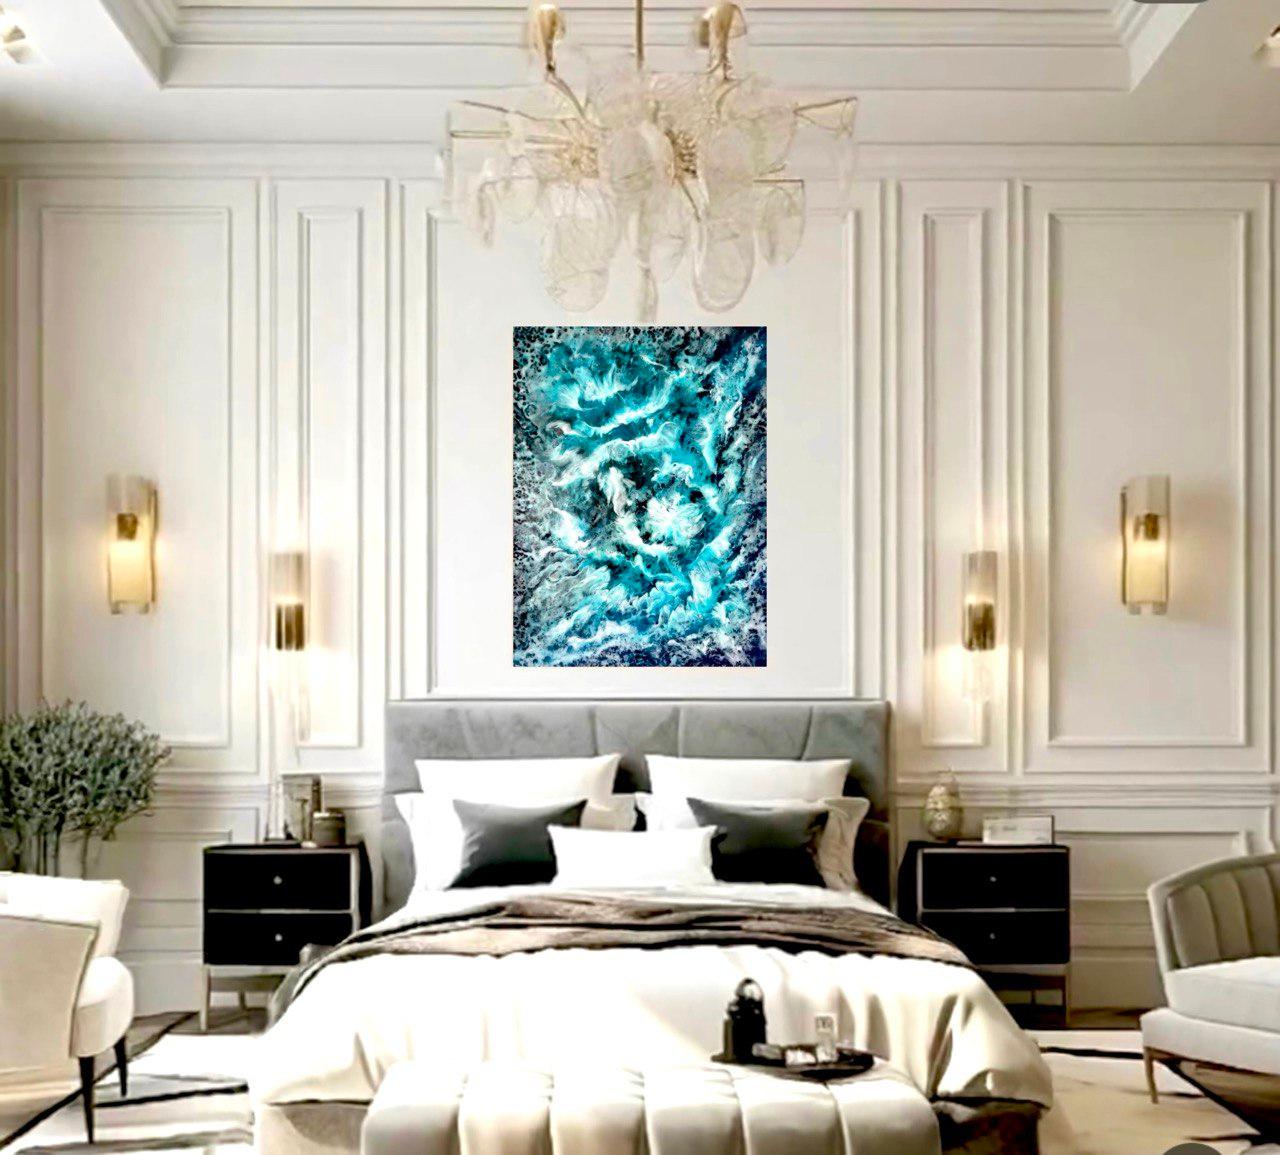 Water and Sky dancing. Interior Abstract painting. Clouds in the blue ocean.